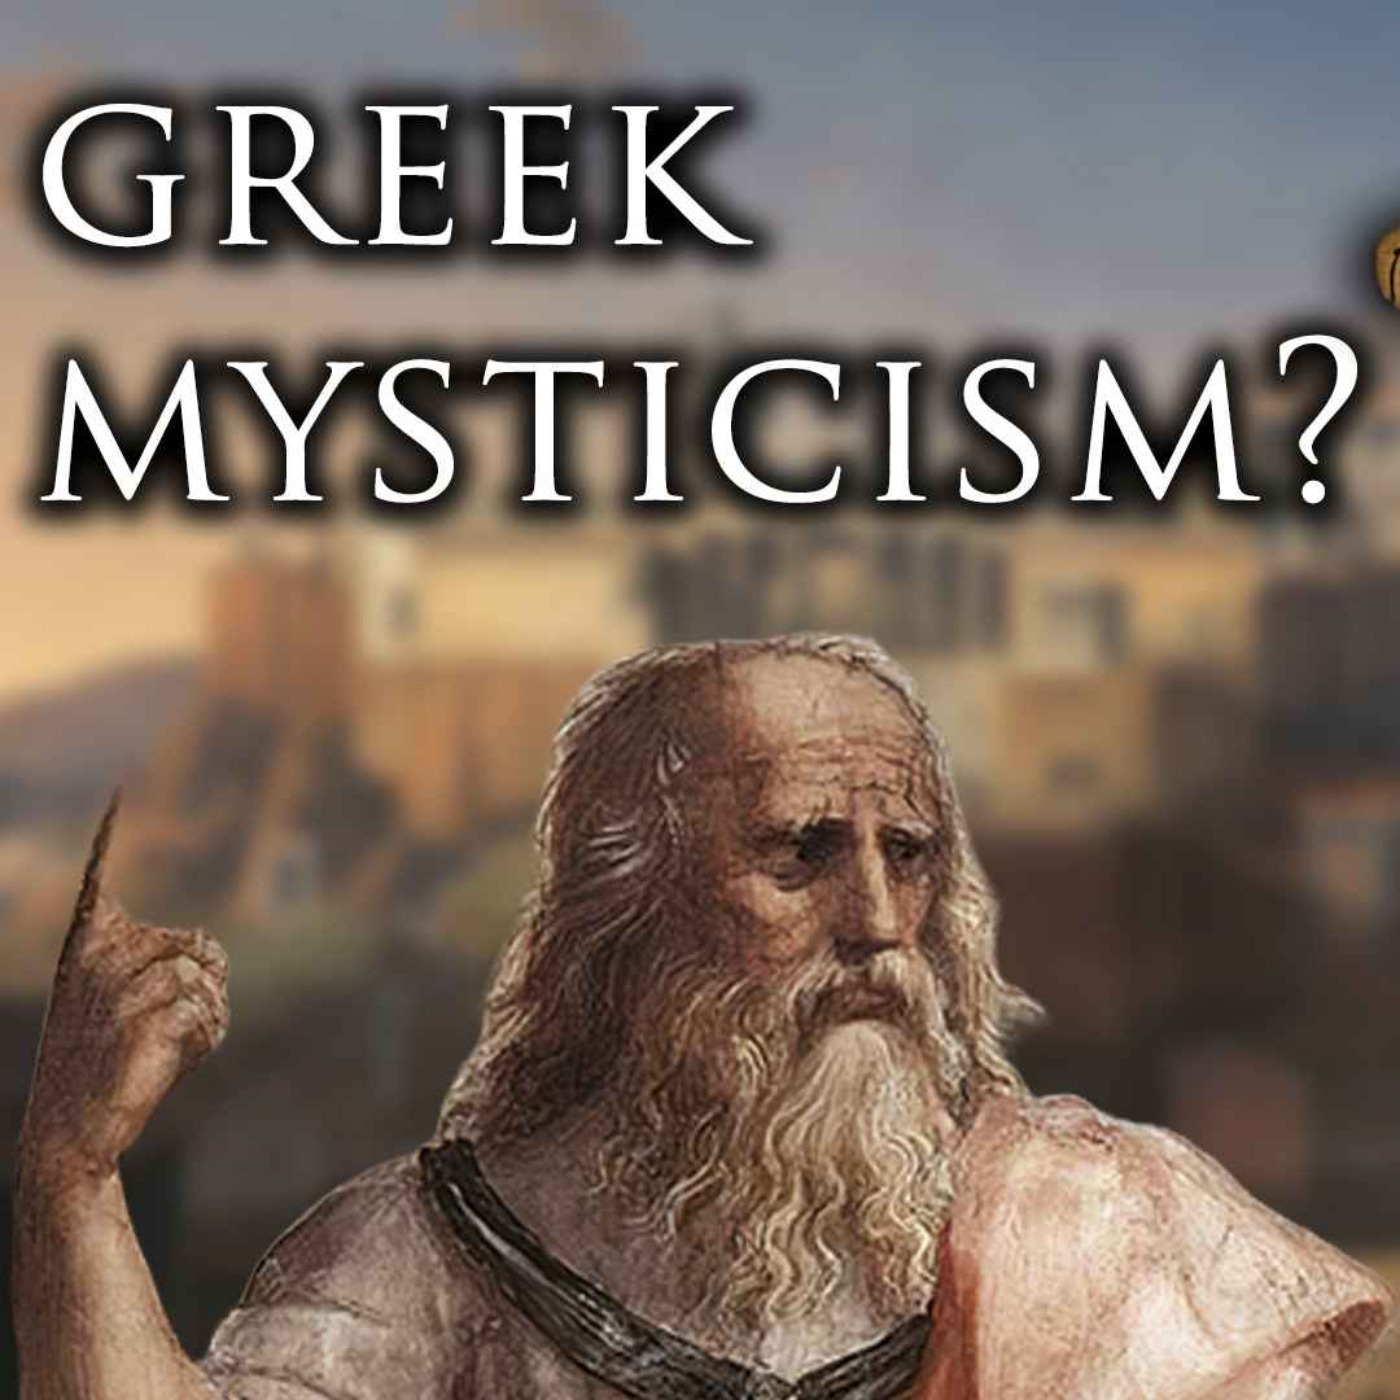 Mysticism in Ancient Greece?